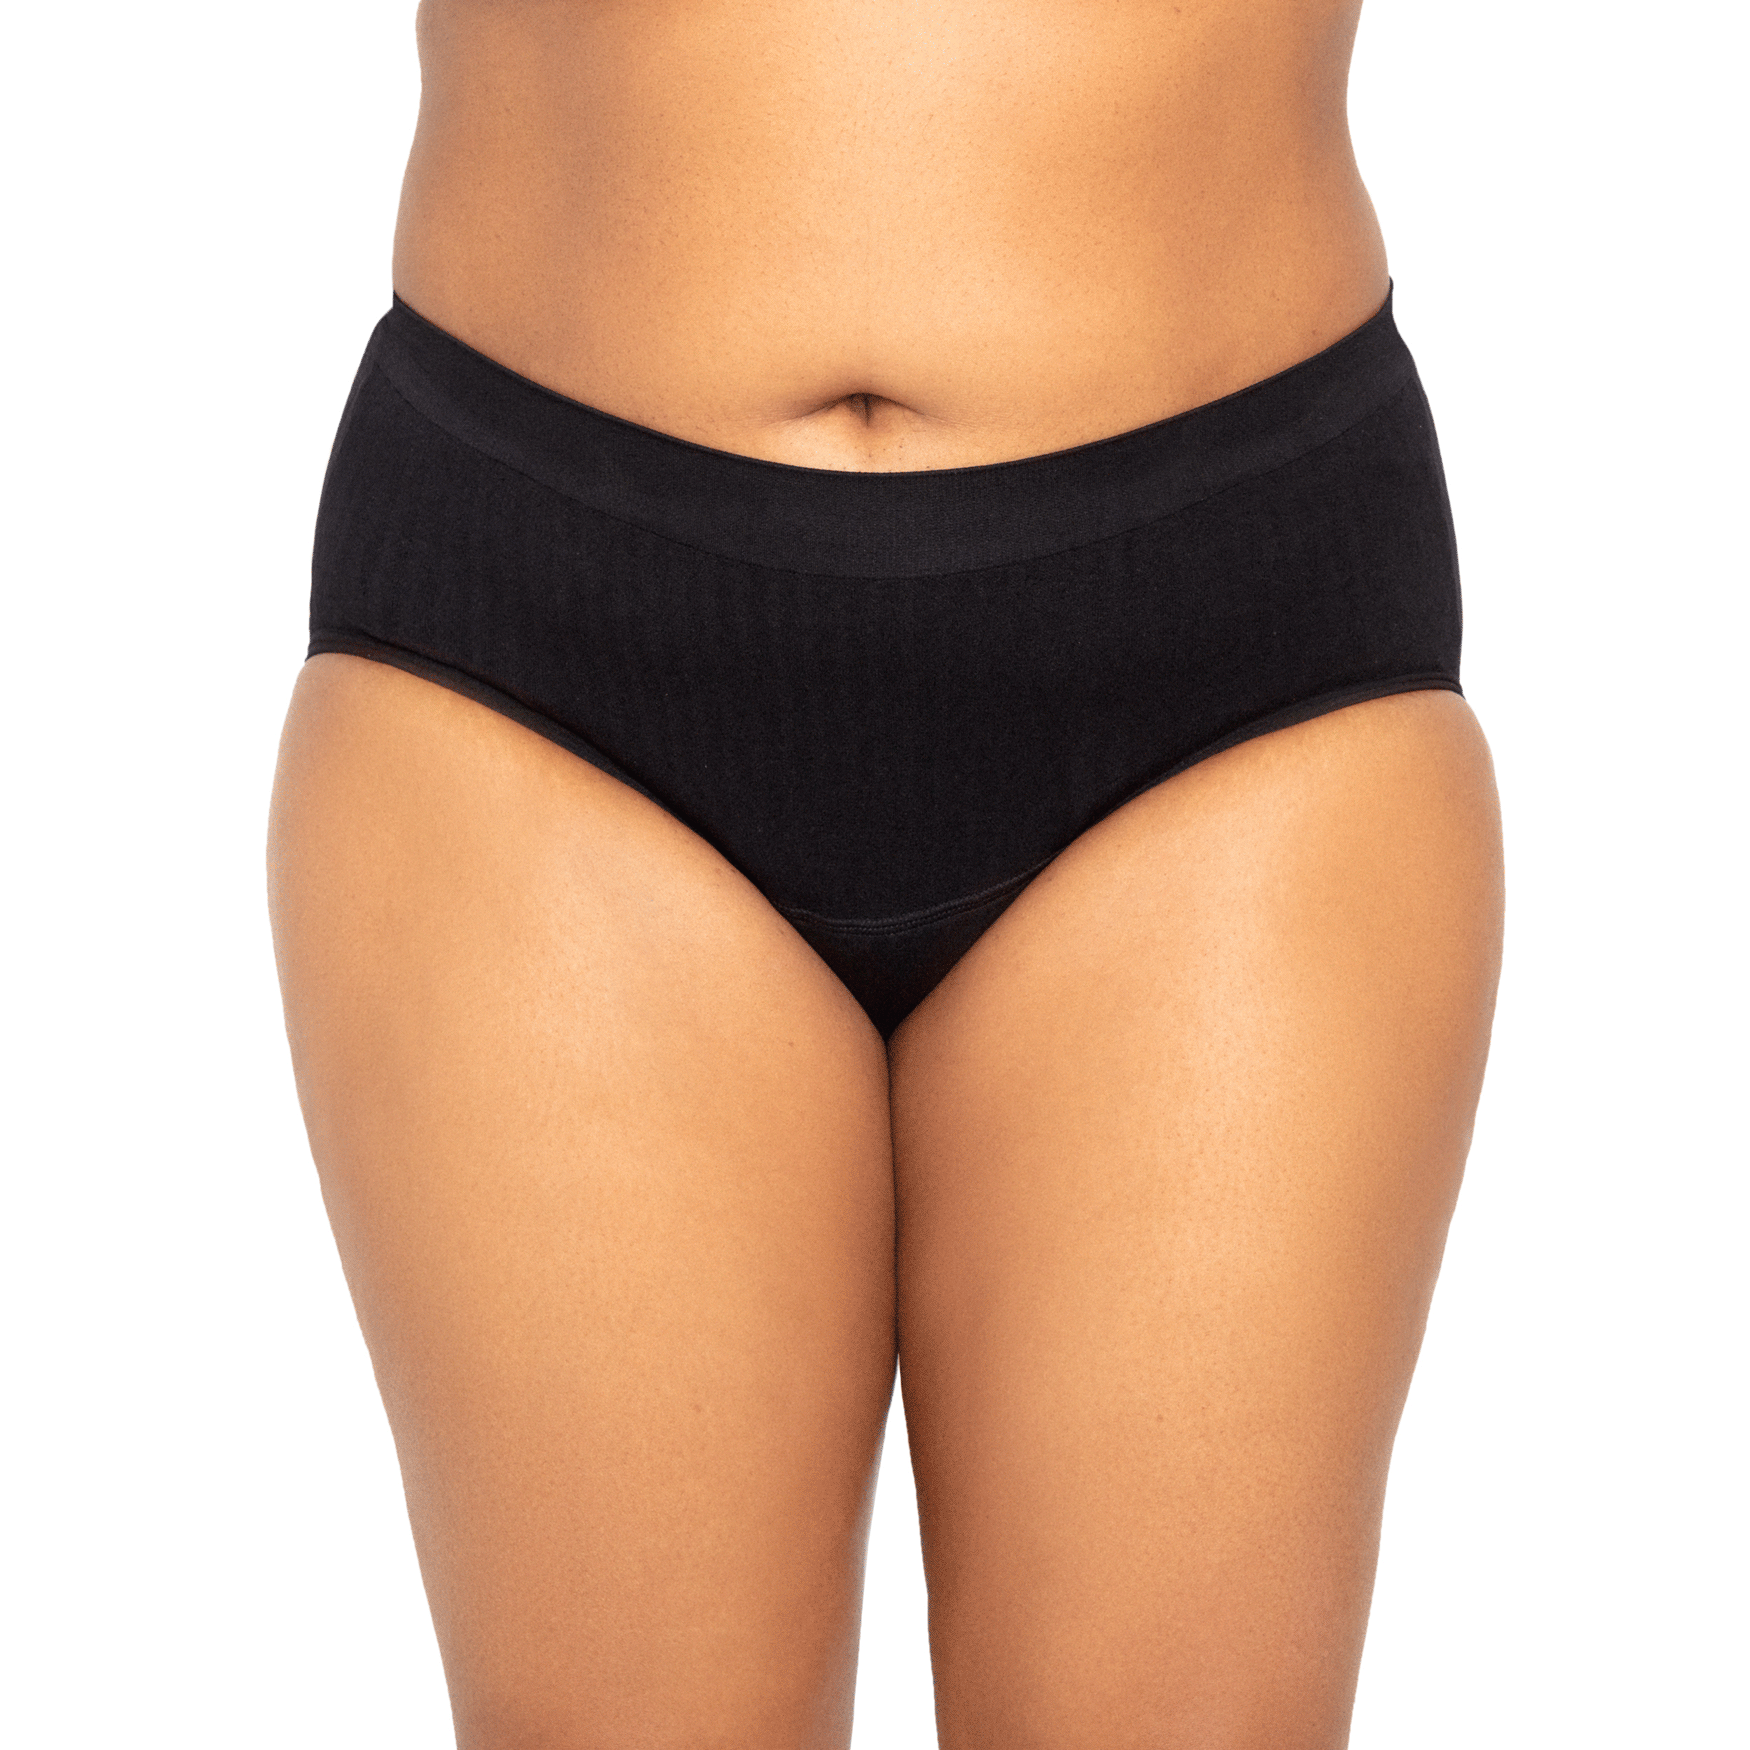  Sporty Stretch High Waisted Period Underwear, Organic Cotton  Gusset, Super-Absorbent for Heavy Flows